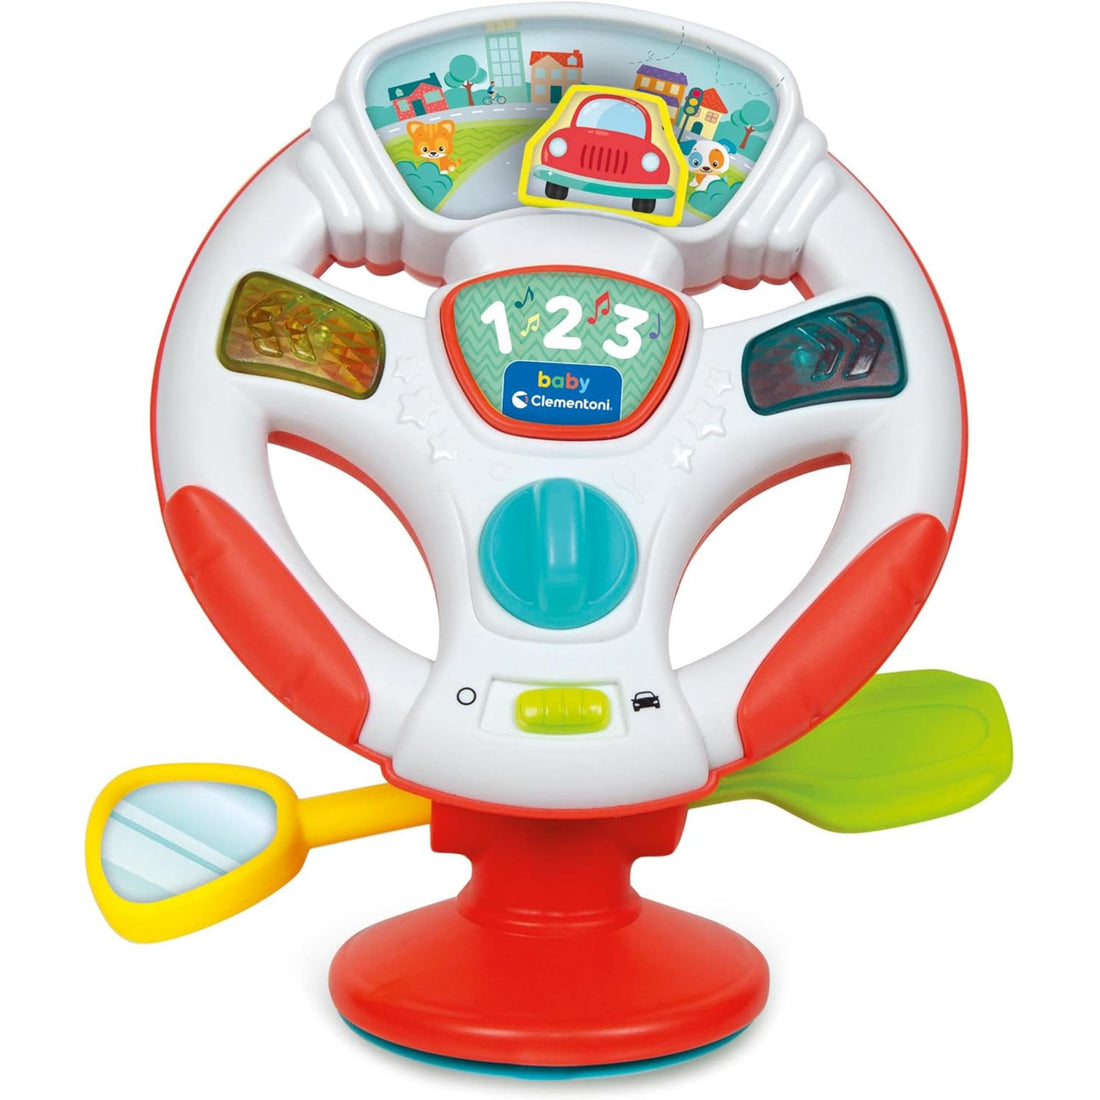 Turn and Drive Activity Wheel